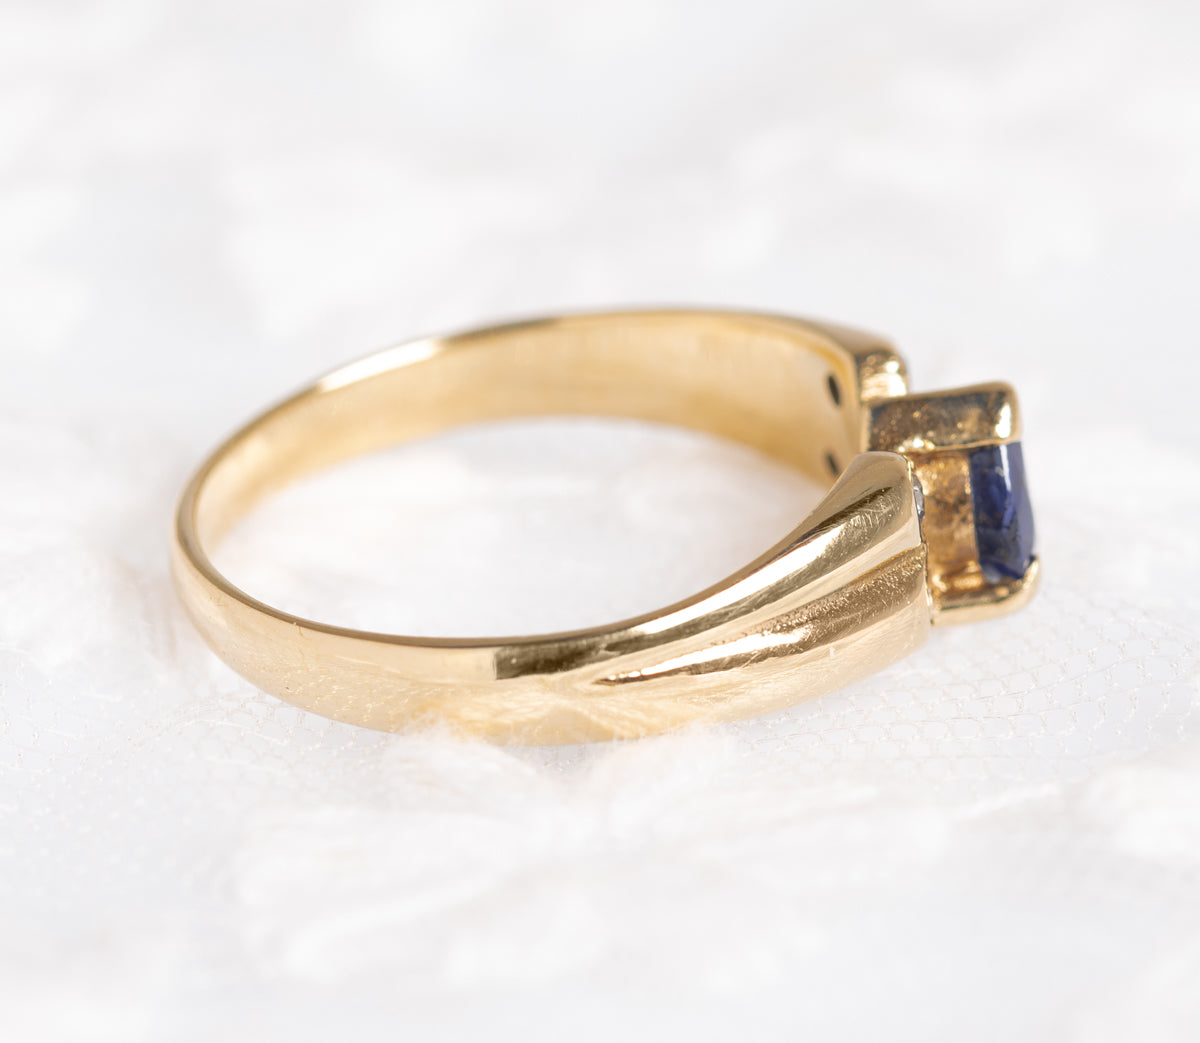 Natural Blue Sapphire Gemstone Ring In 9 Carat Gold With Four Diamonds Vintage  (A1383)